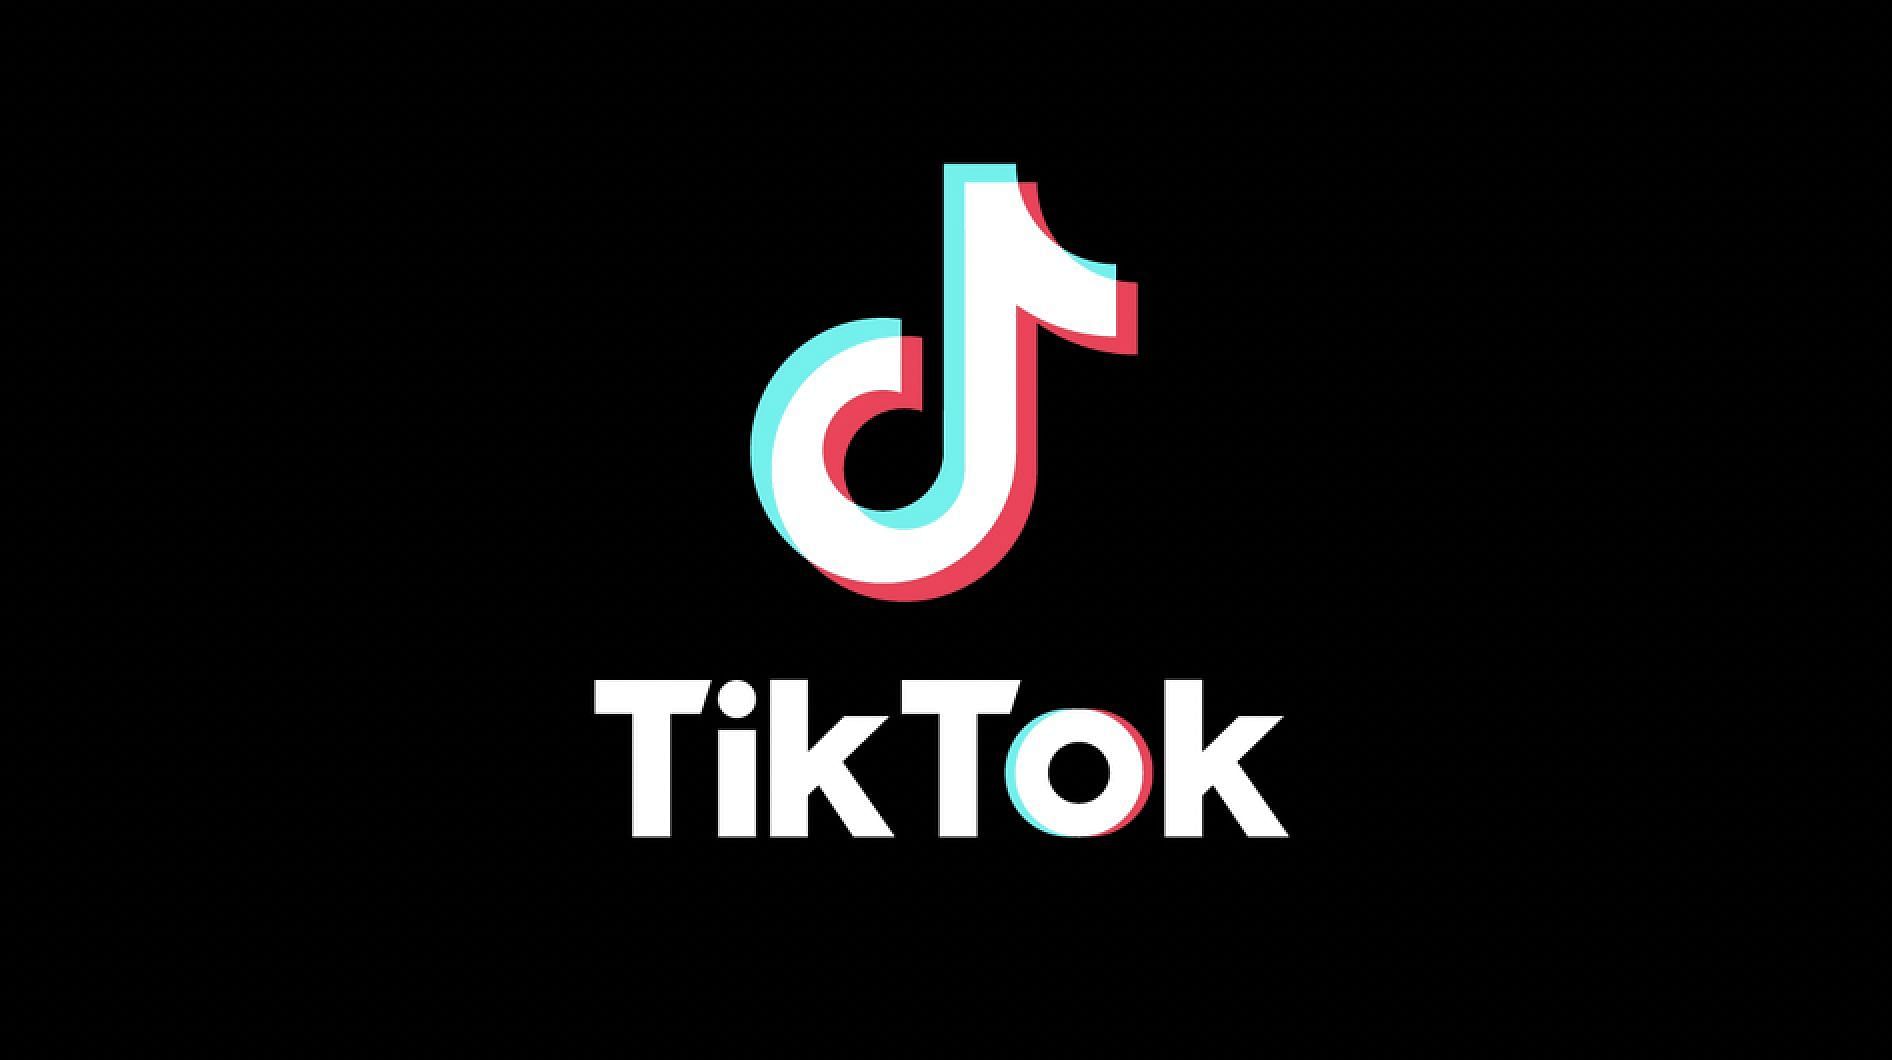 Why searching about the degloved videos on TikTok is not recommended? Reason and meaning explored. (Image via TikTok)